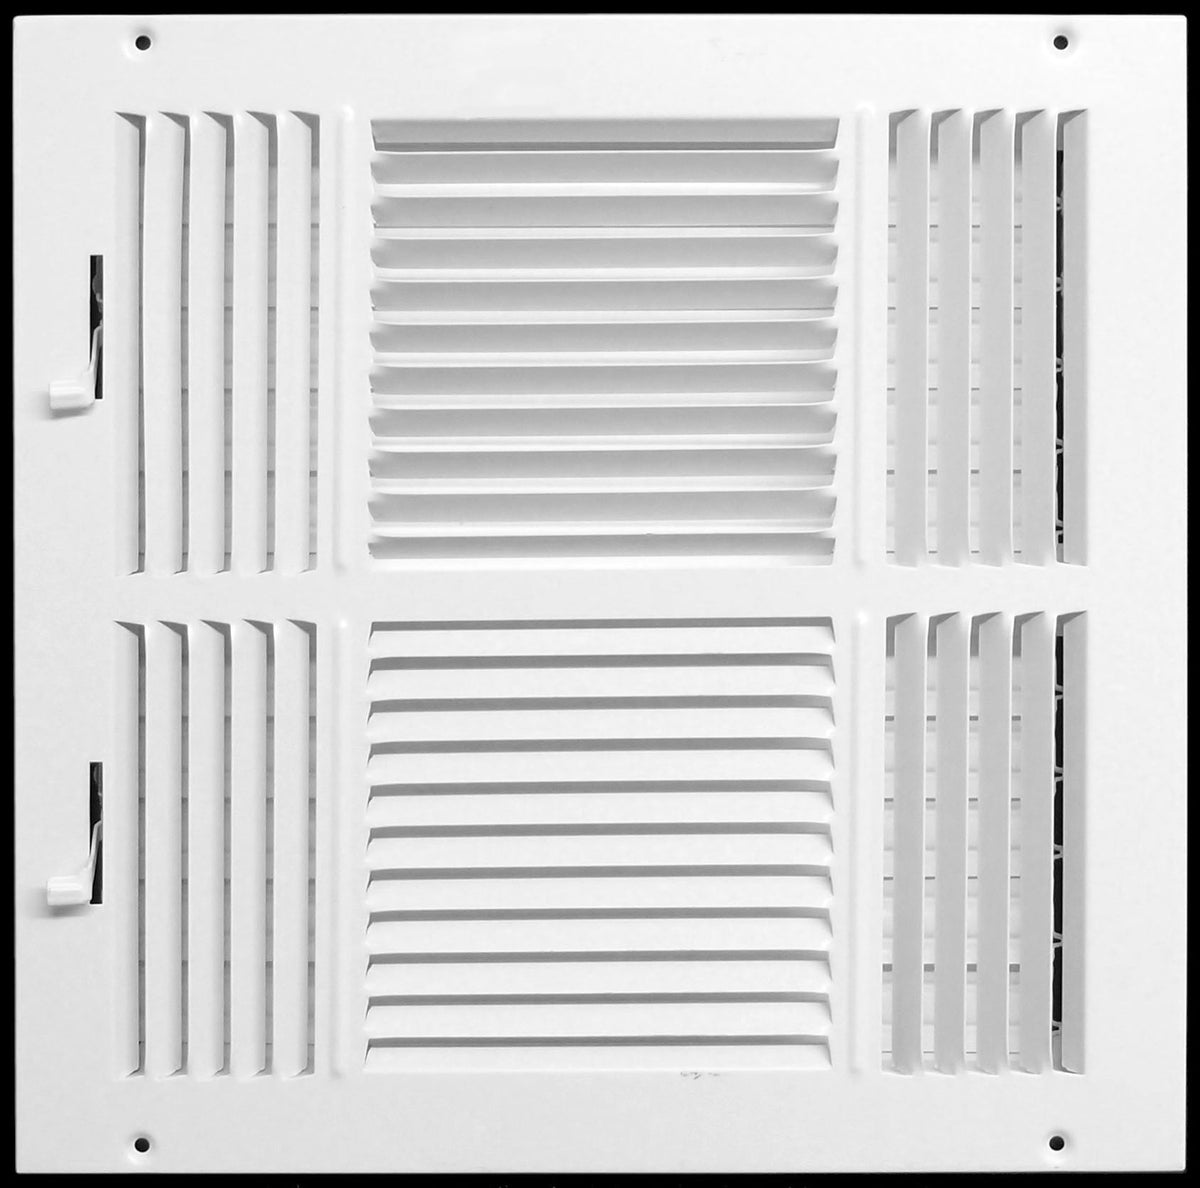 16&quot; X 16&quot; 4-Way AIR SUPPLY GRILLE - DUCT COVER &amp; DIFFUSER - Flat Stamped Face